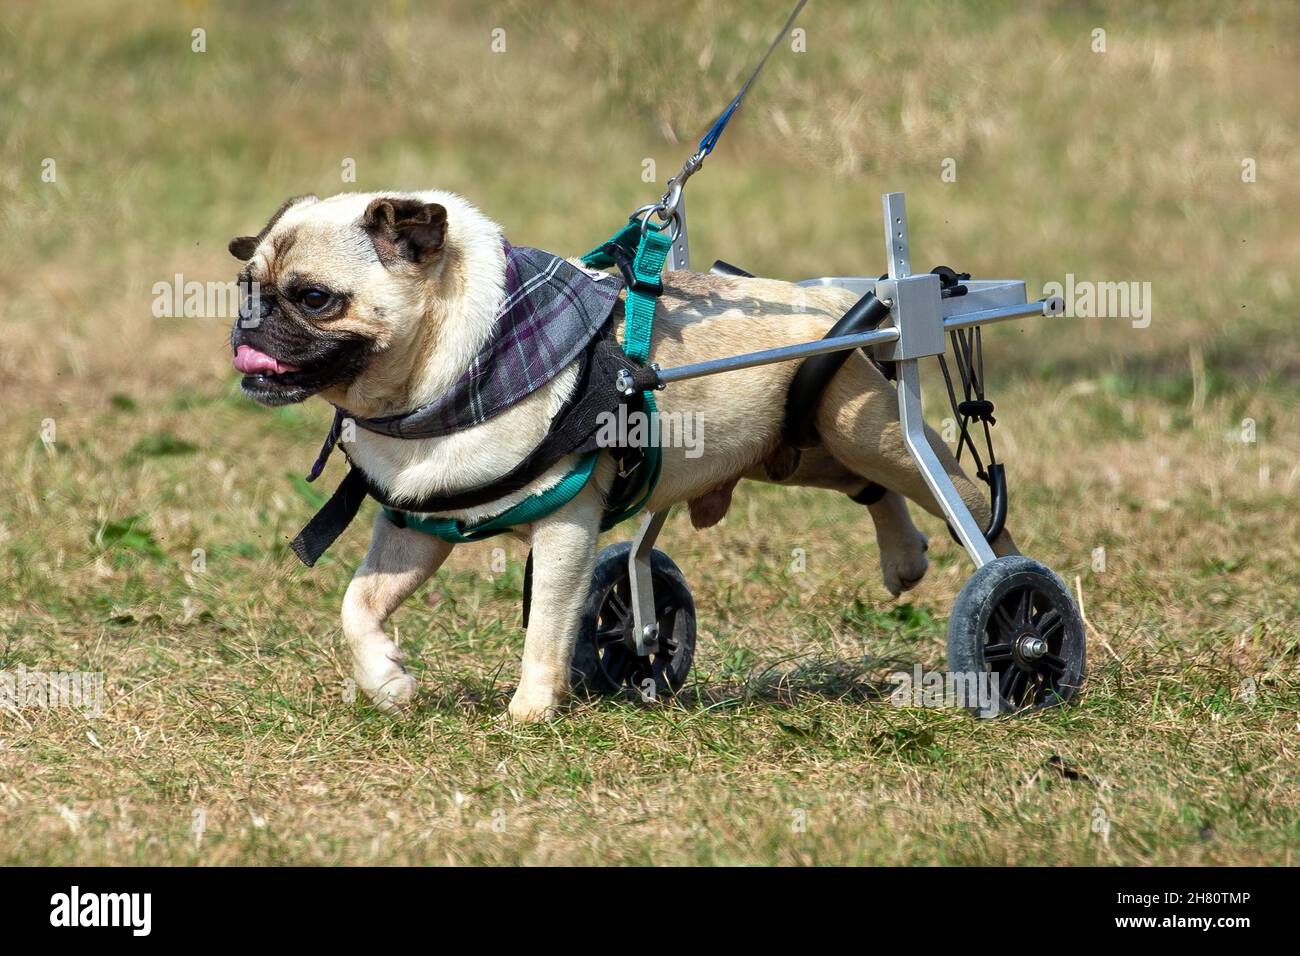 Disabled Pug using a dog wheelchair Stock Photo - Alamy